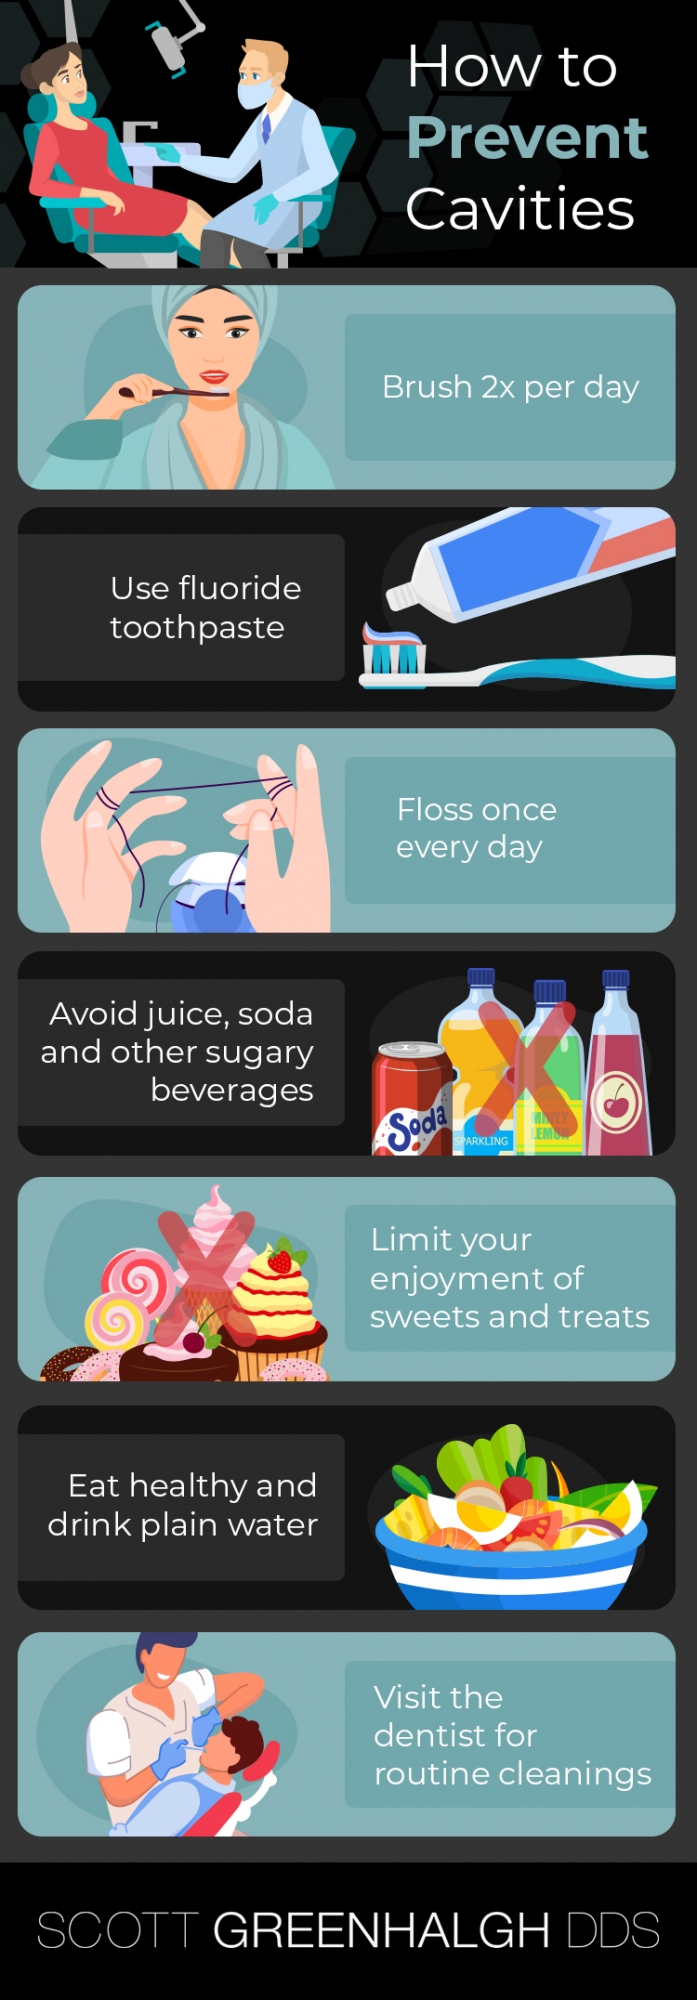 Infographic showing how to prevent cavities